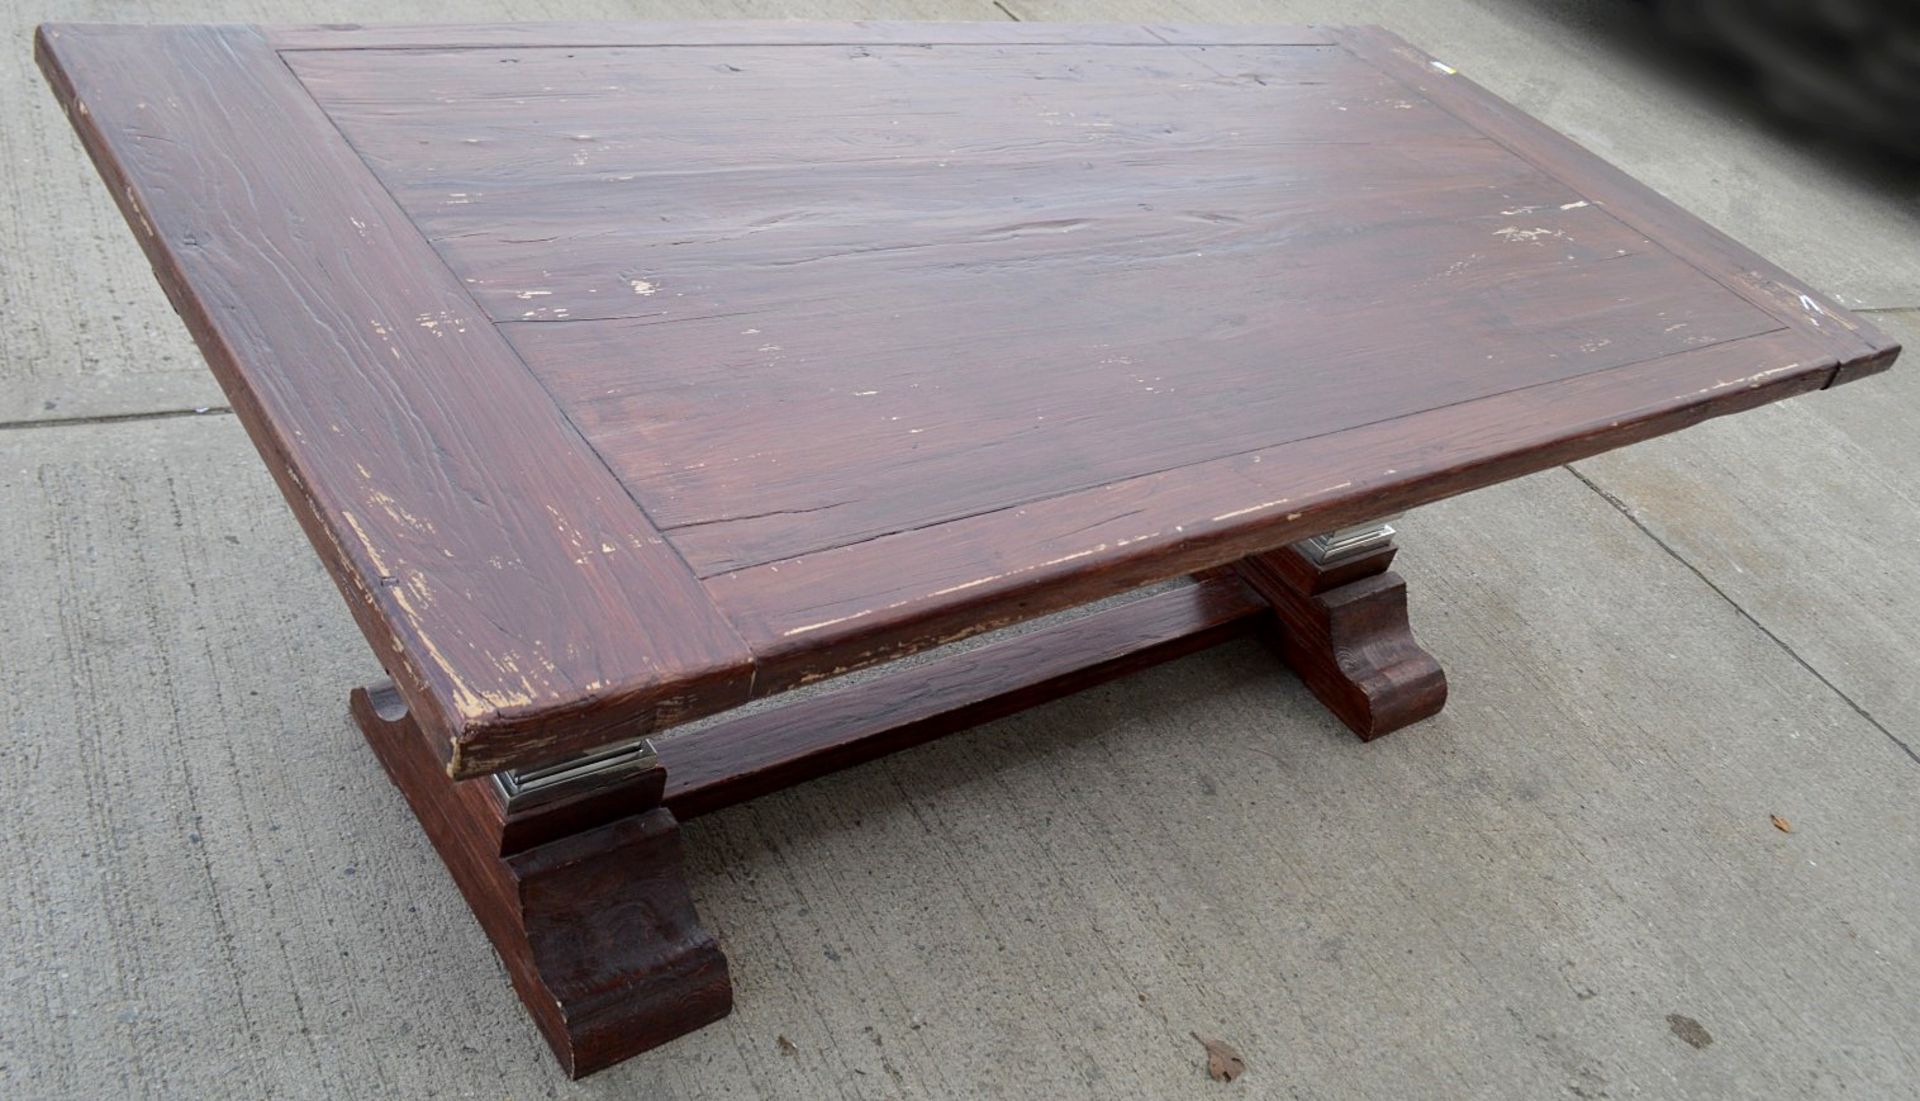 1 x Sturdy 2 Metre Georgian-Style Solid Wood Dining Table In A Dark Stain With A Chromed Base - Image 3 of 6